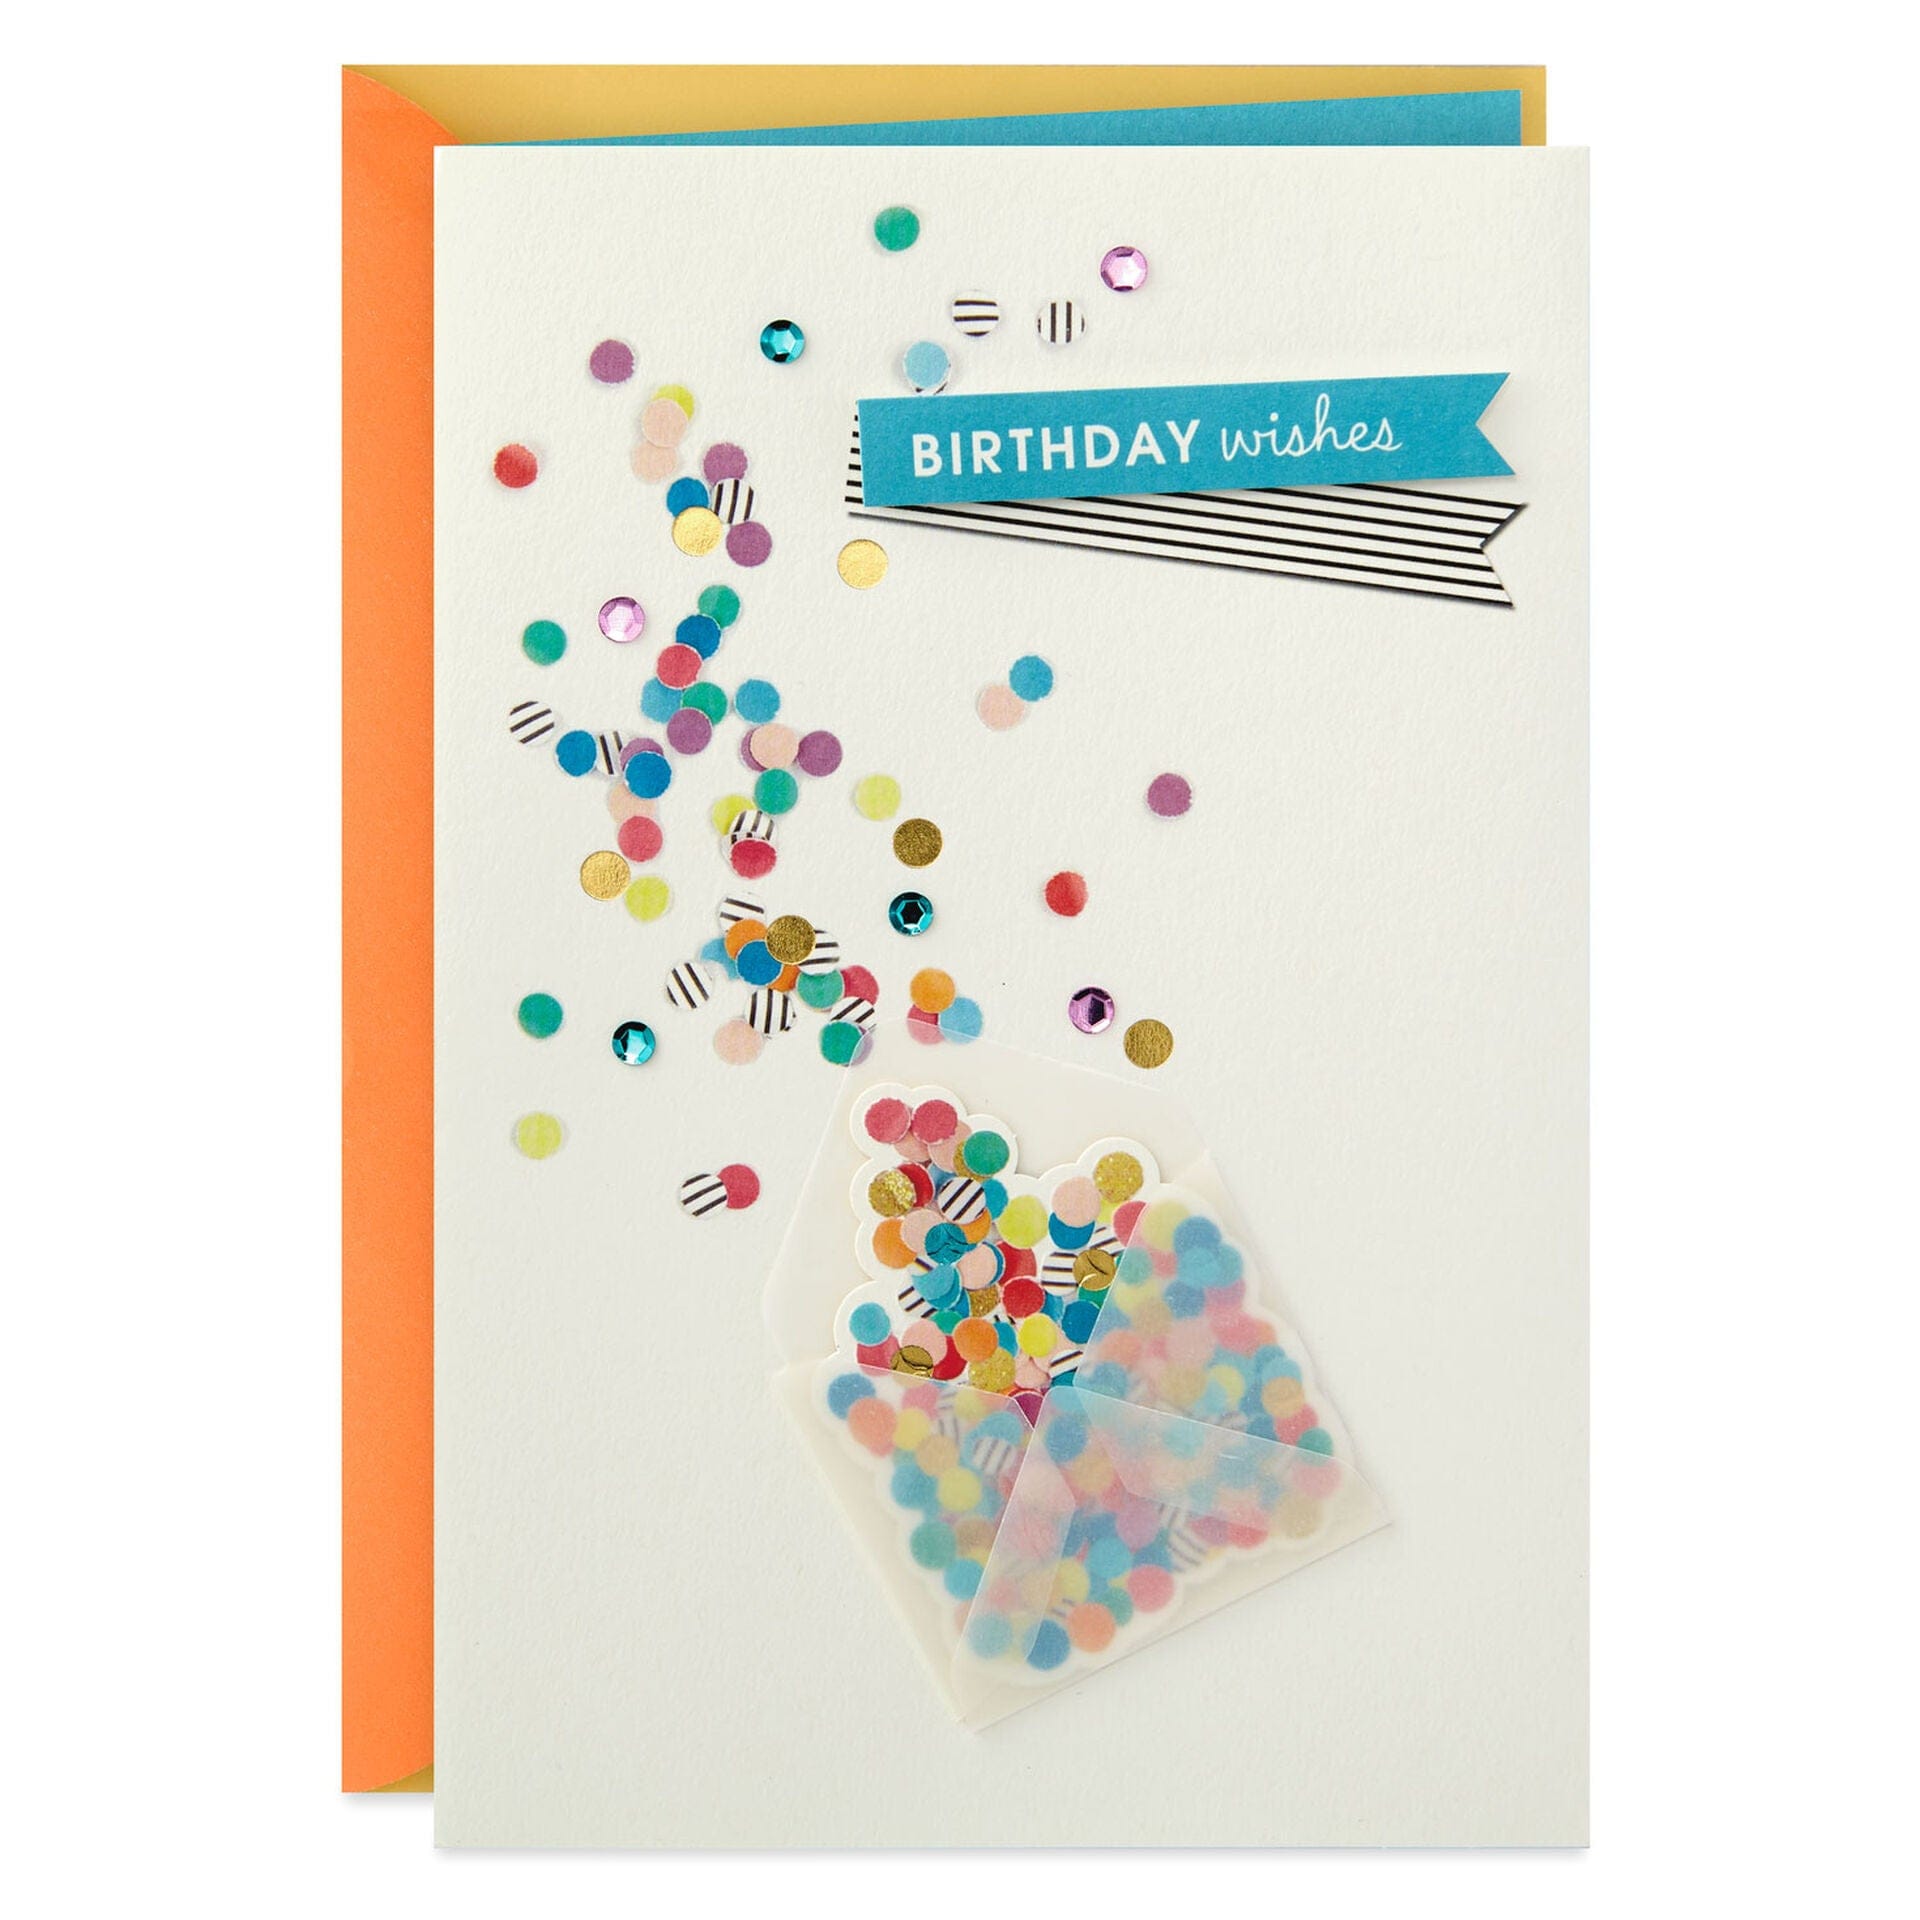 Every Little Happiness Birthday Card - Shelburne Country Store